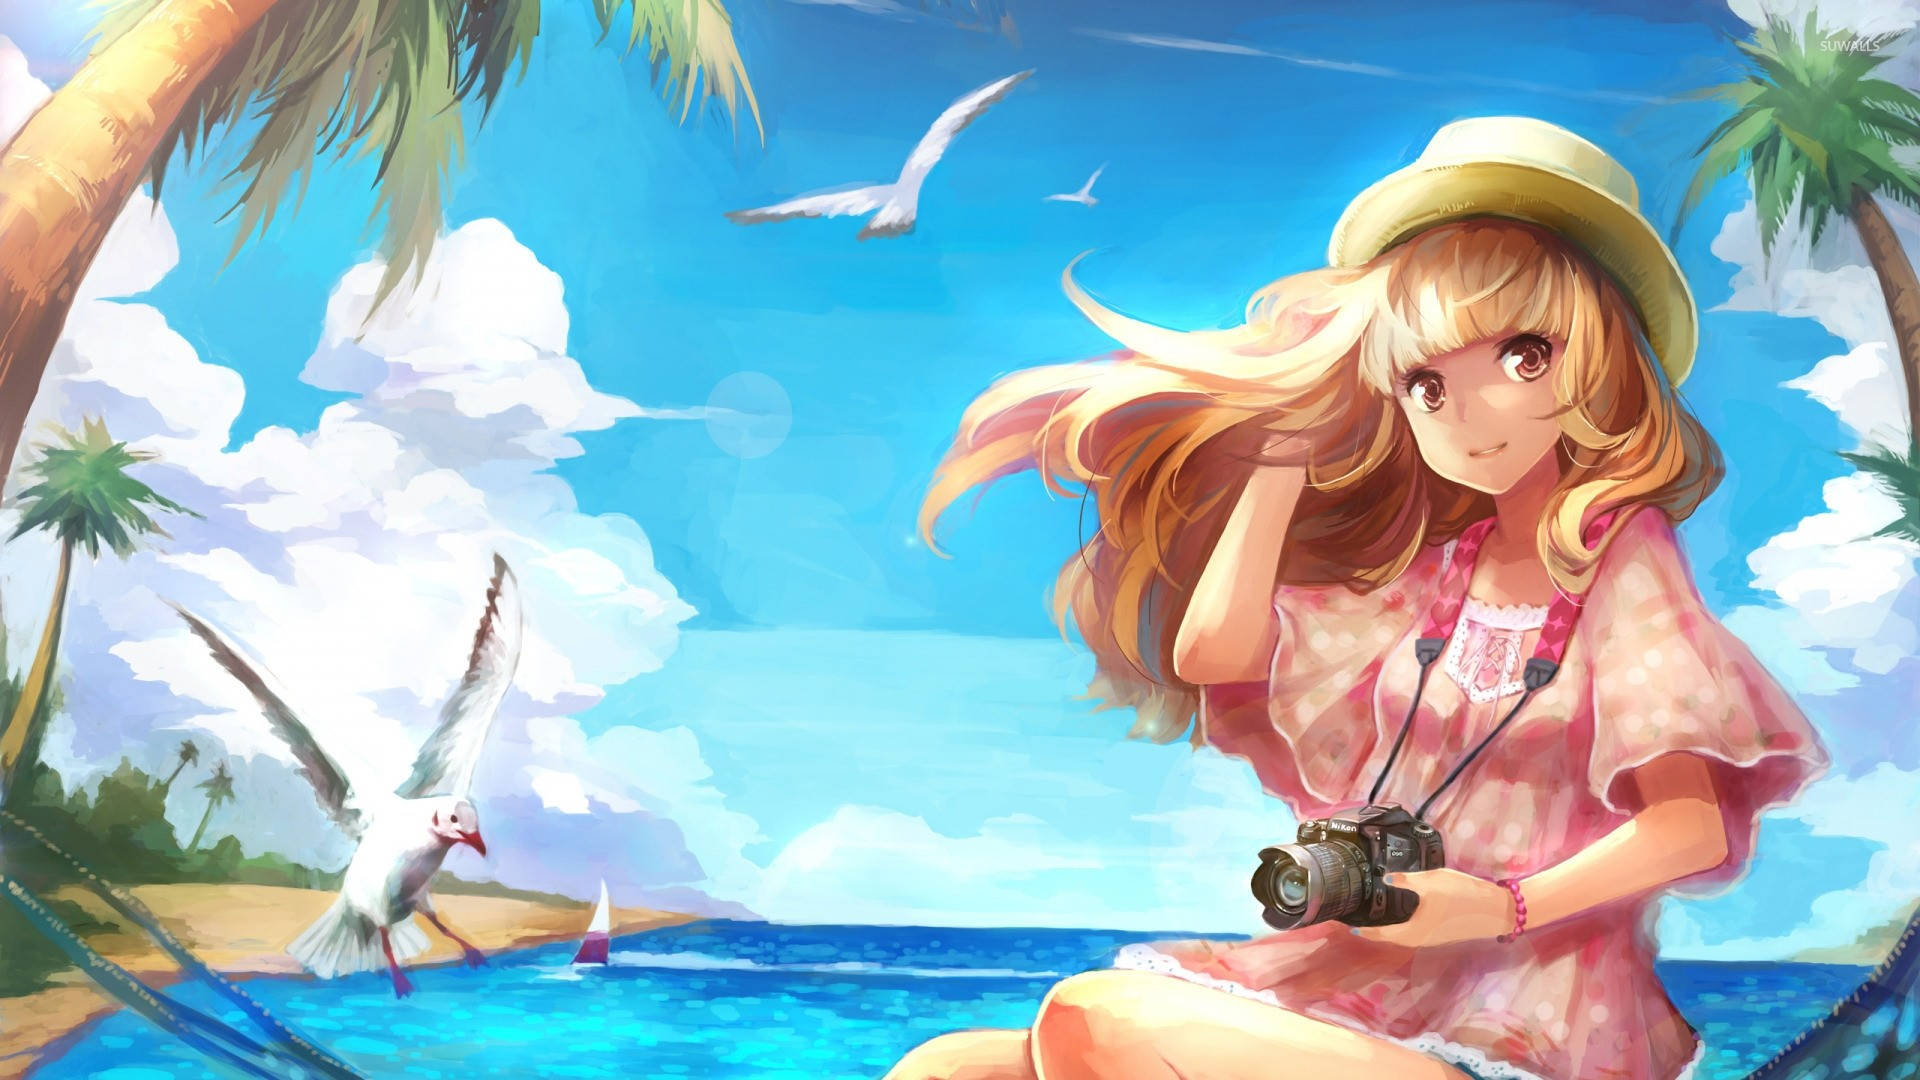 Anime Girl In Beach Vacation Wallpaper